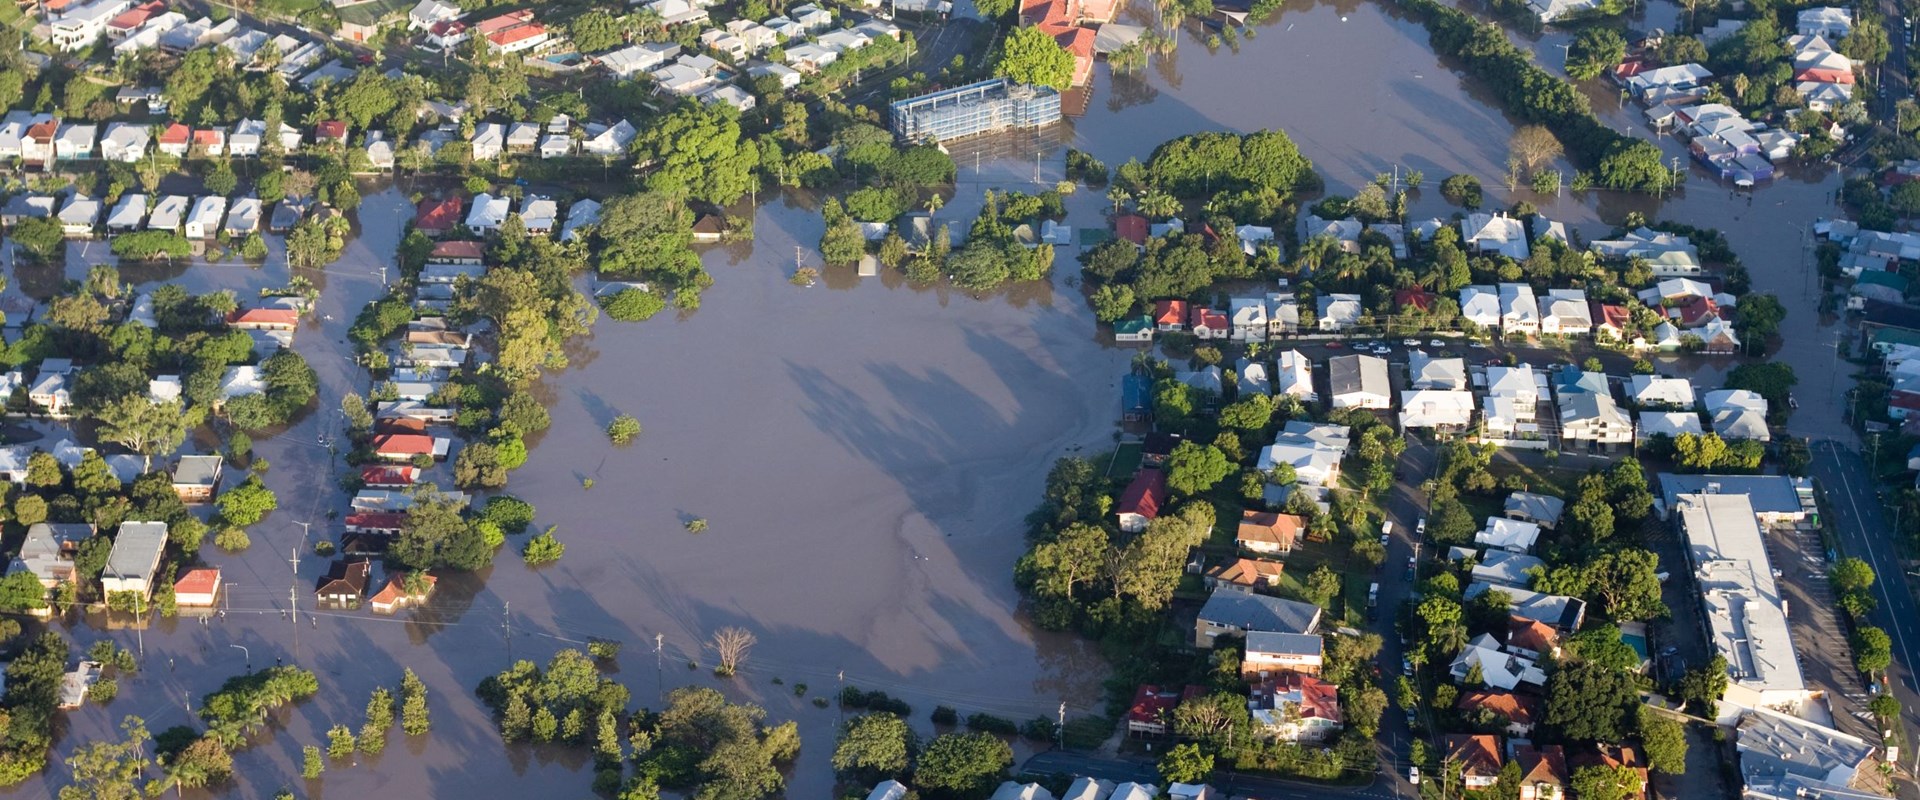 An aerial photography of a Brisbane urban area under water due to flooding